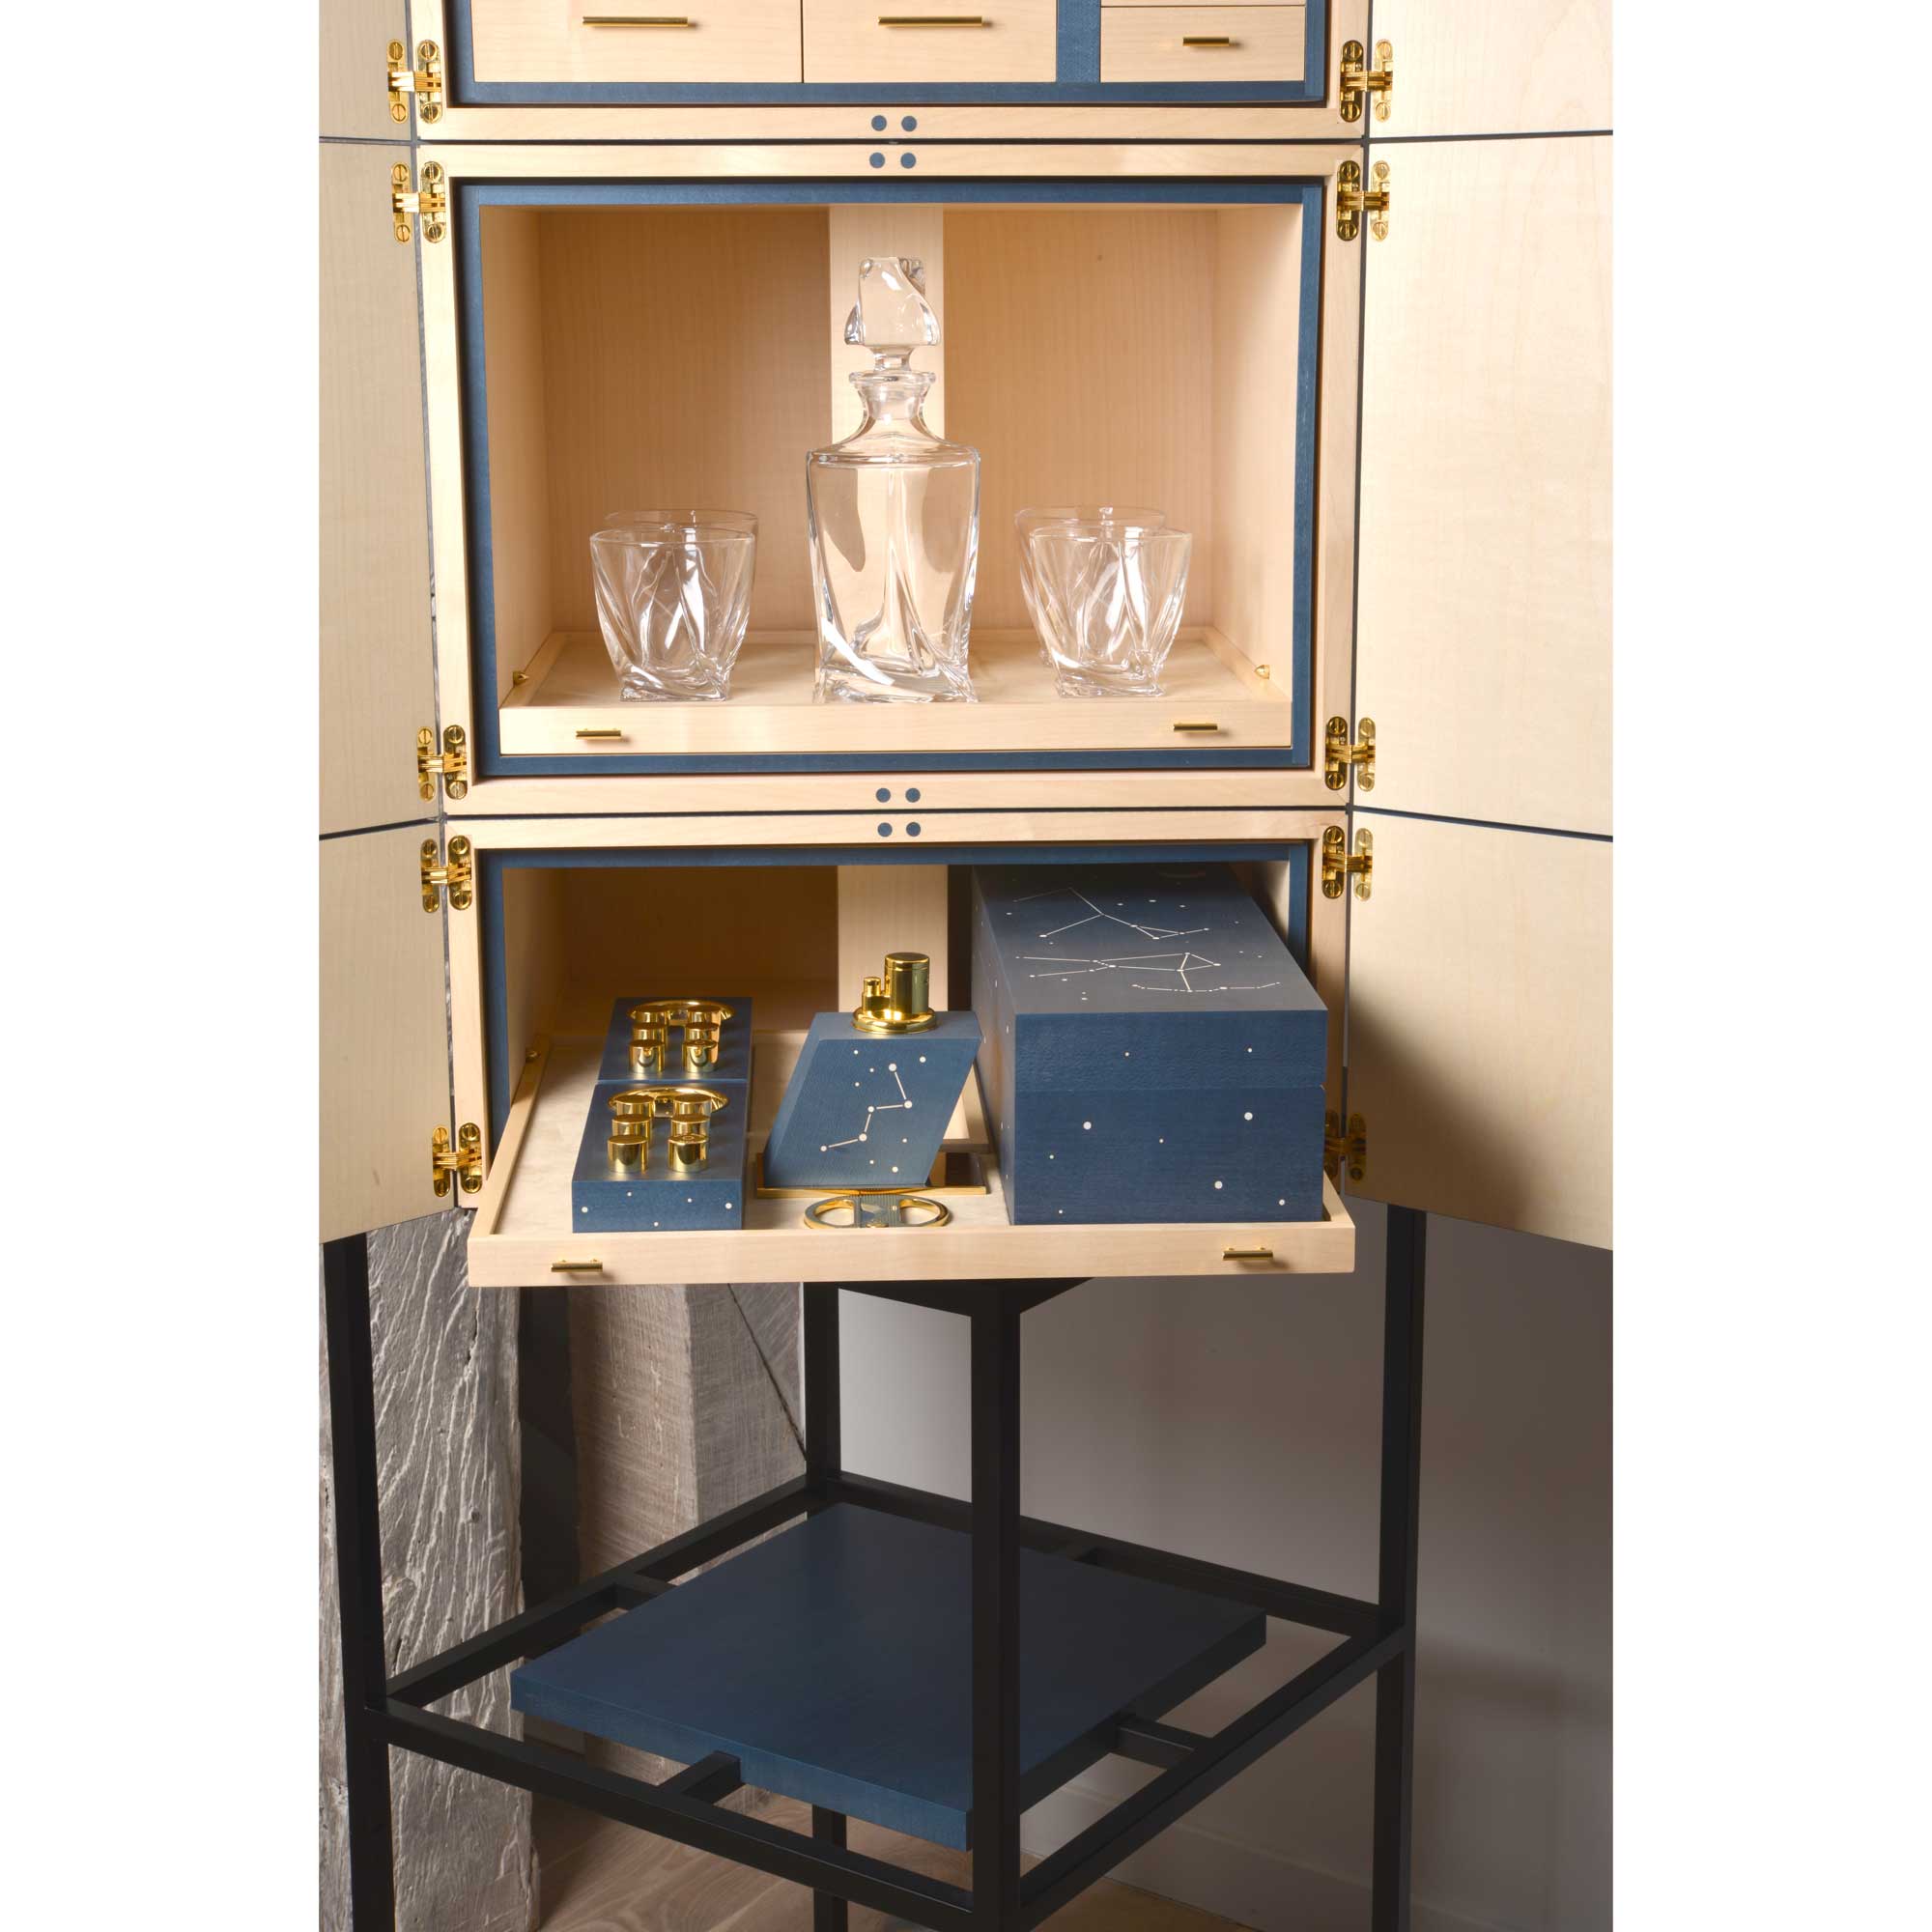 "Epicure" - Play cabinet